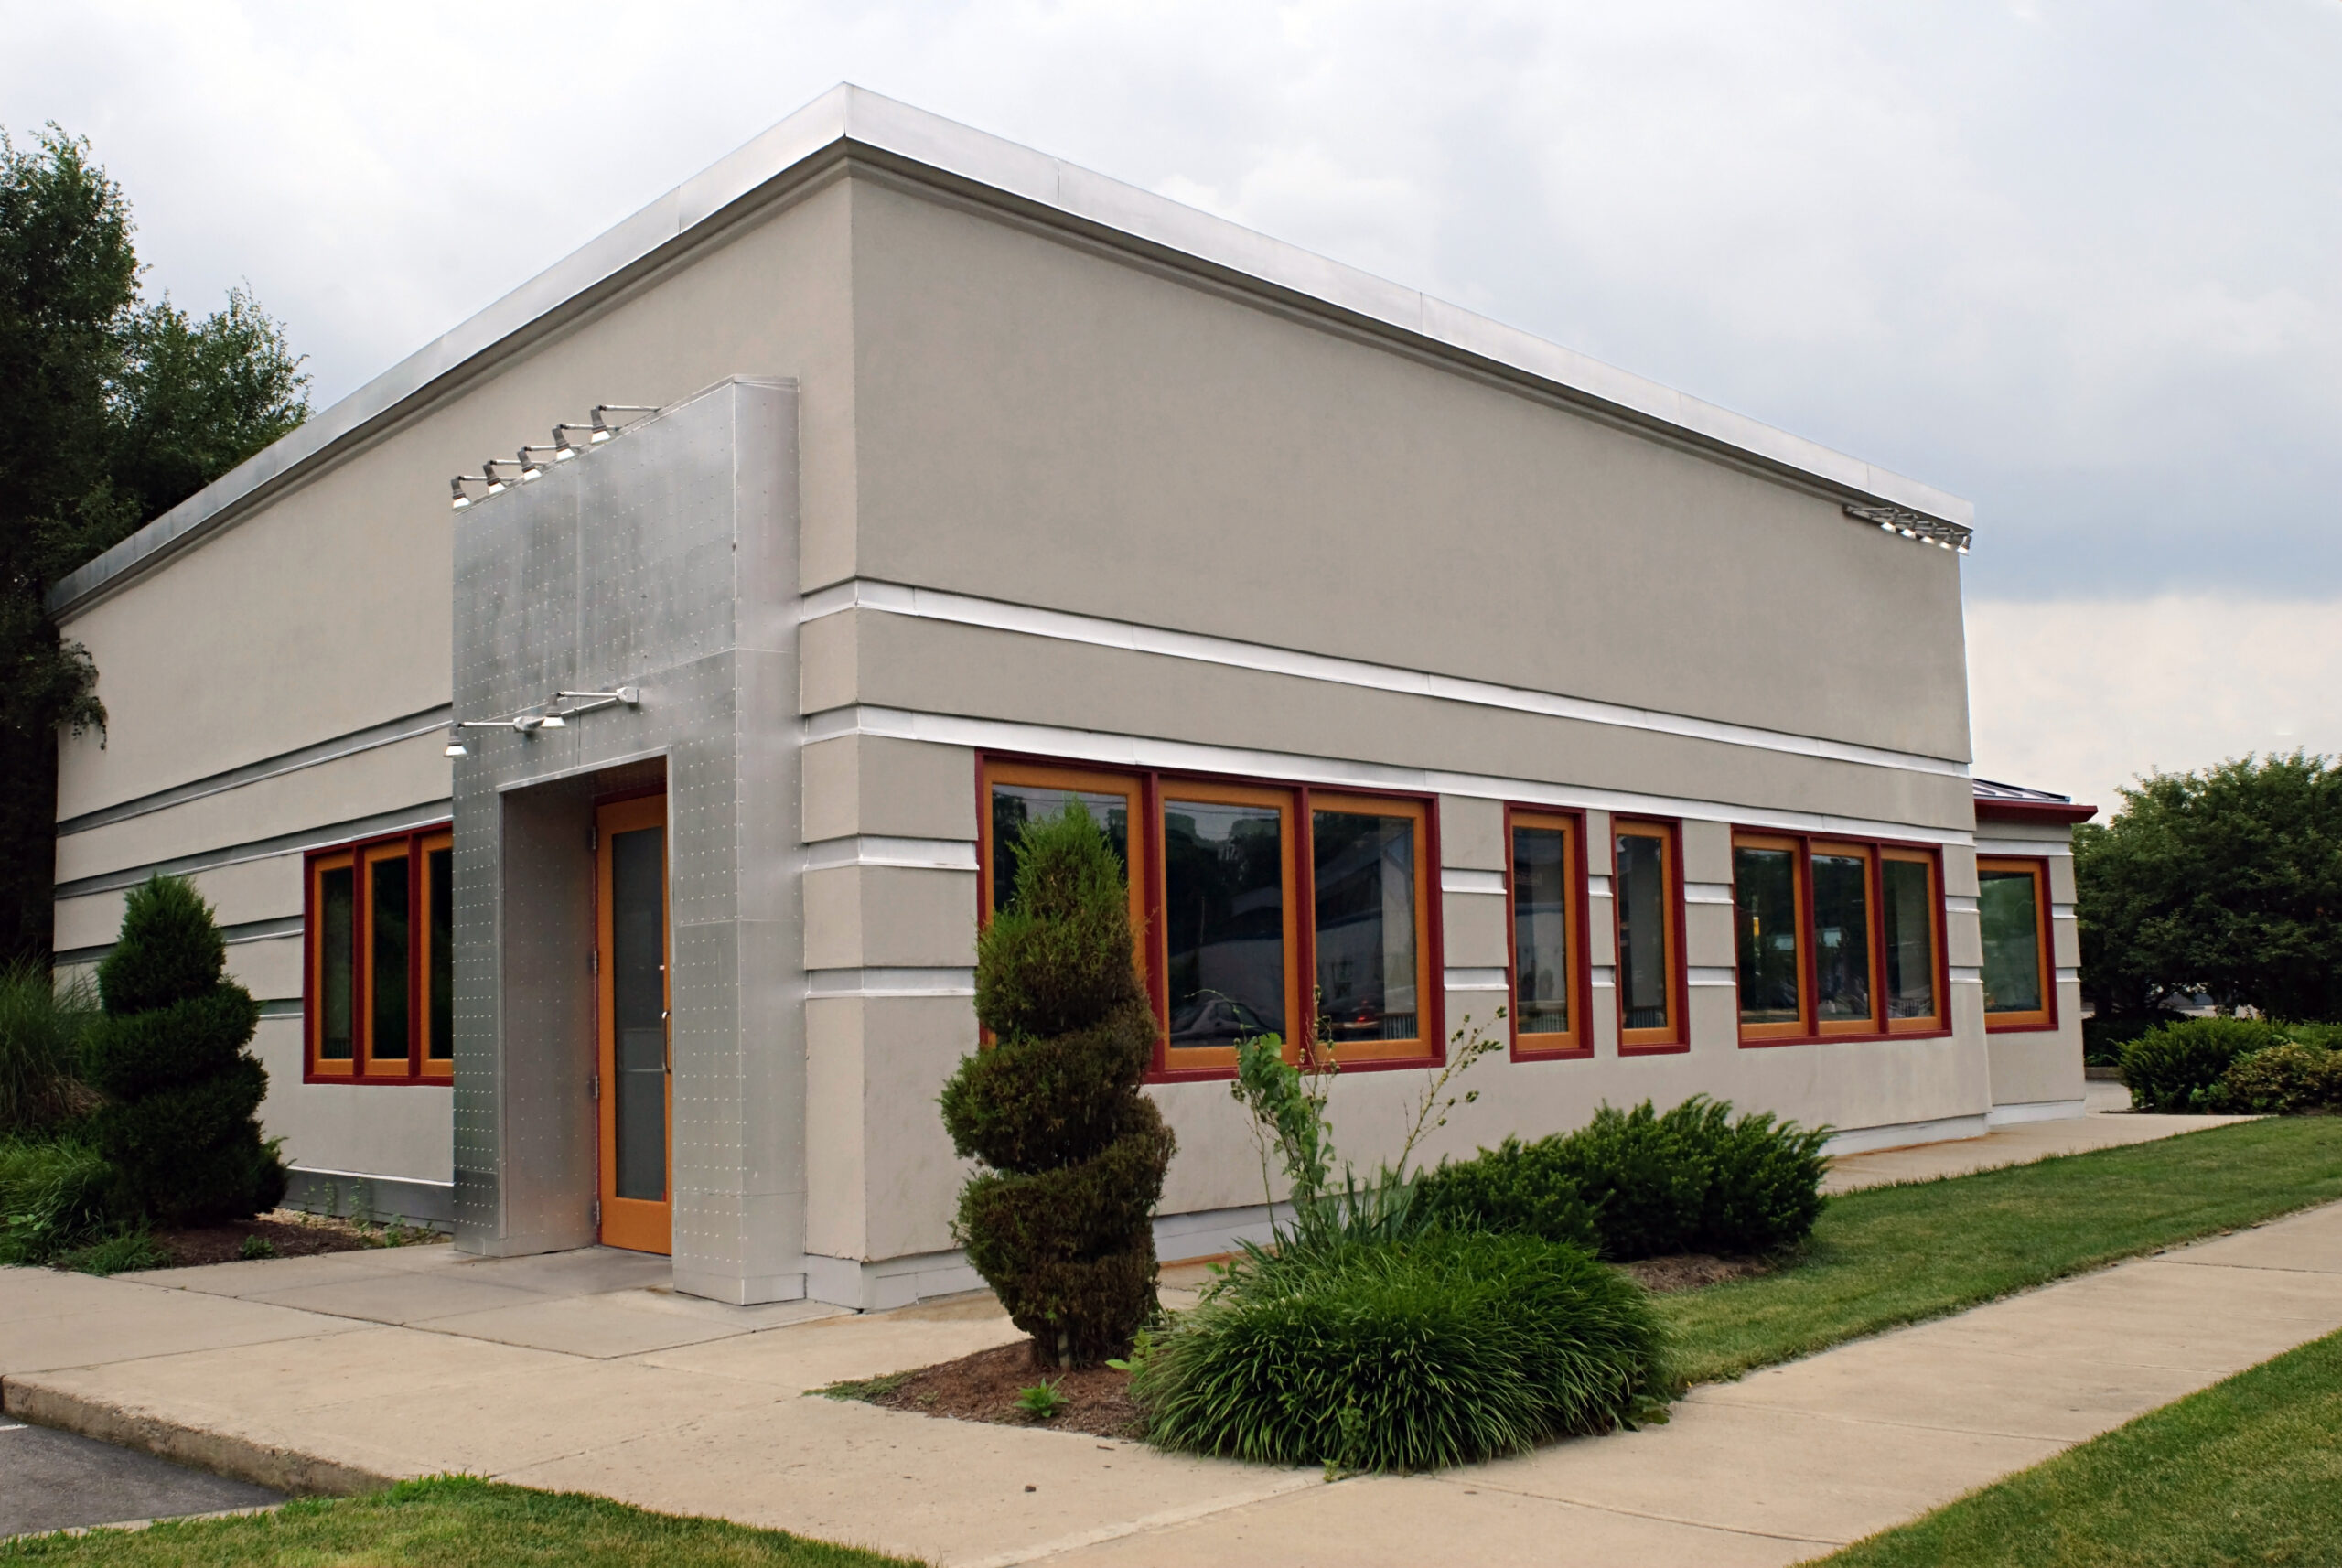 A restaurant building on the corner with gray stucco and a metal modern entrance.